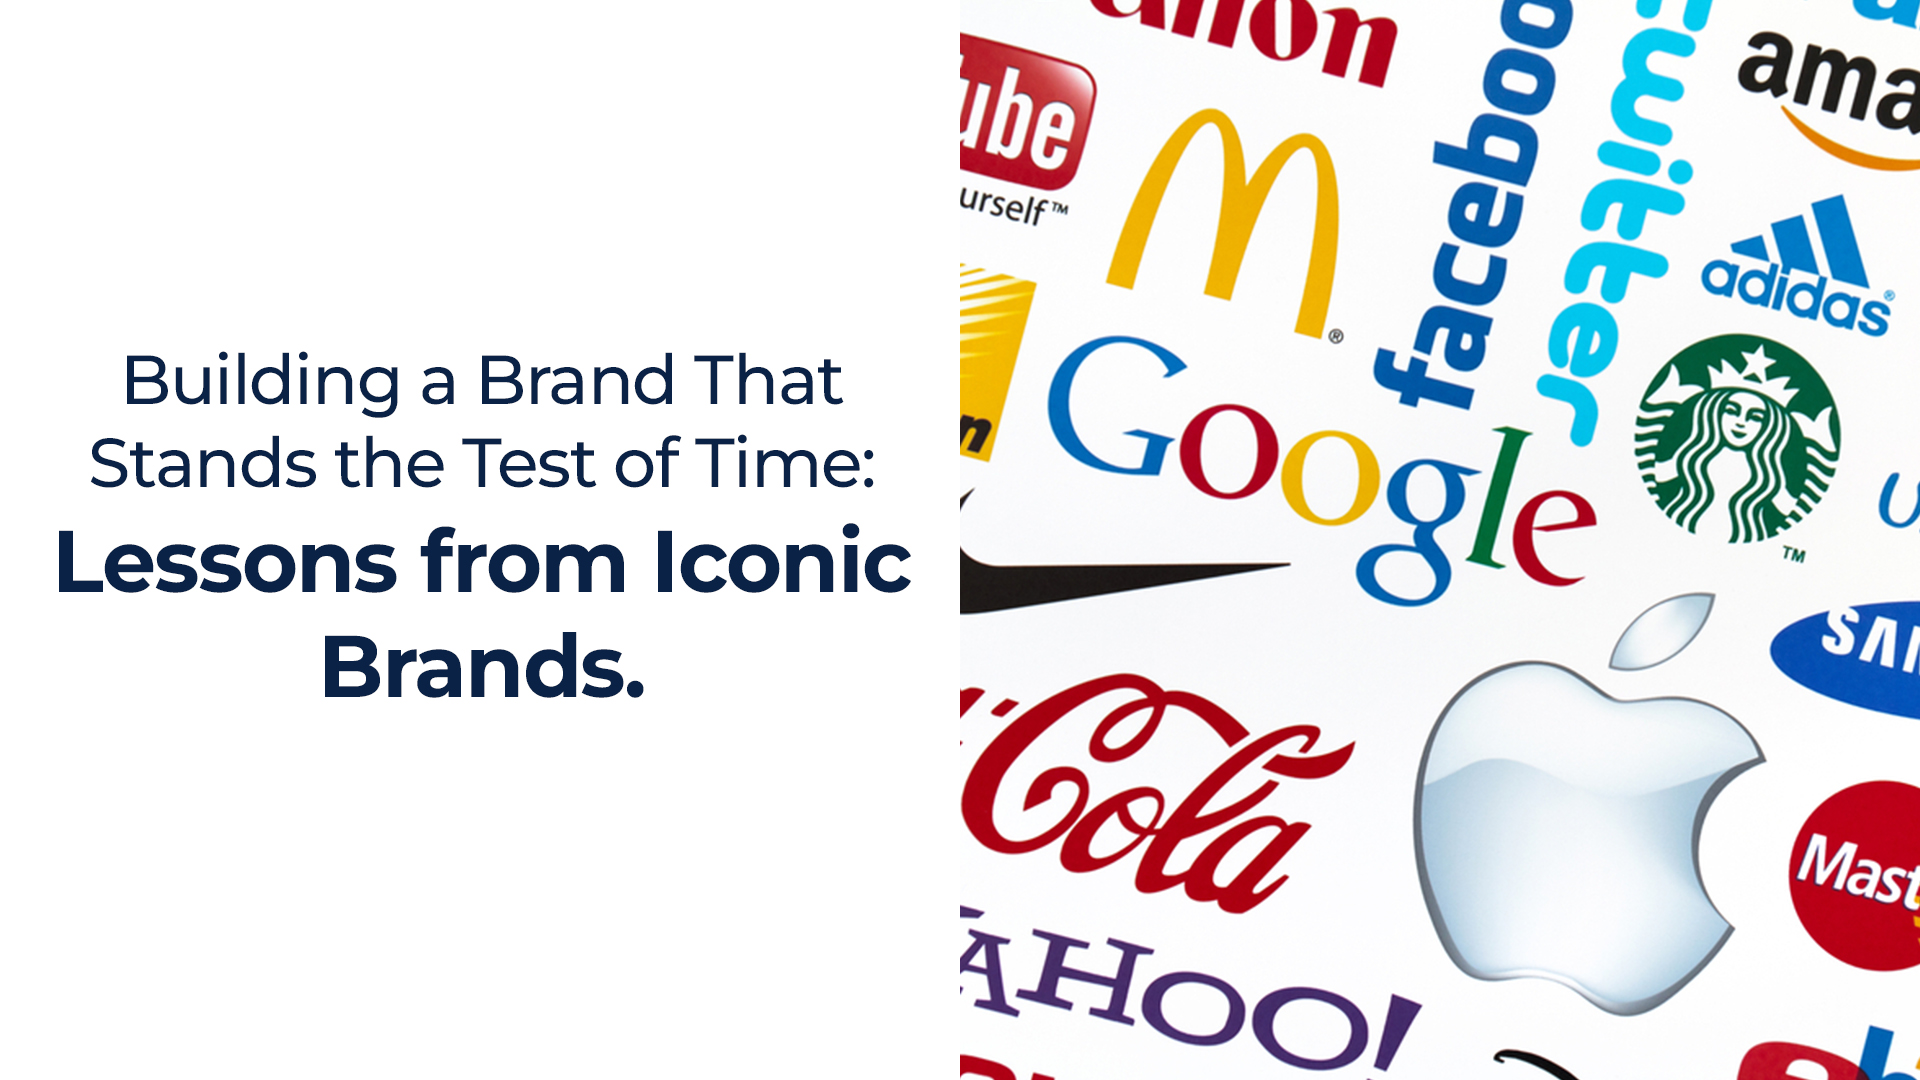 Building a Brand That Stands the Test of Time: Lessons from Iconic Brands